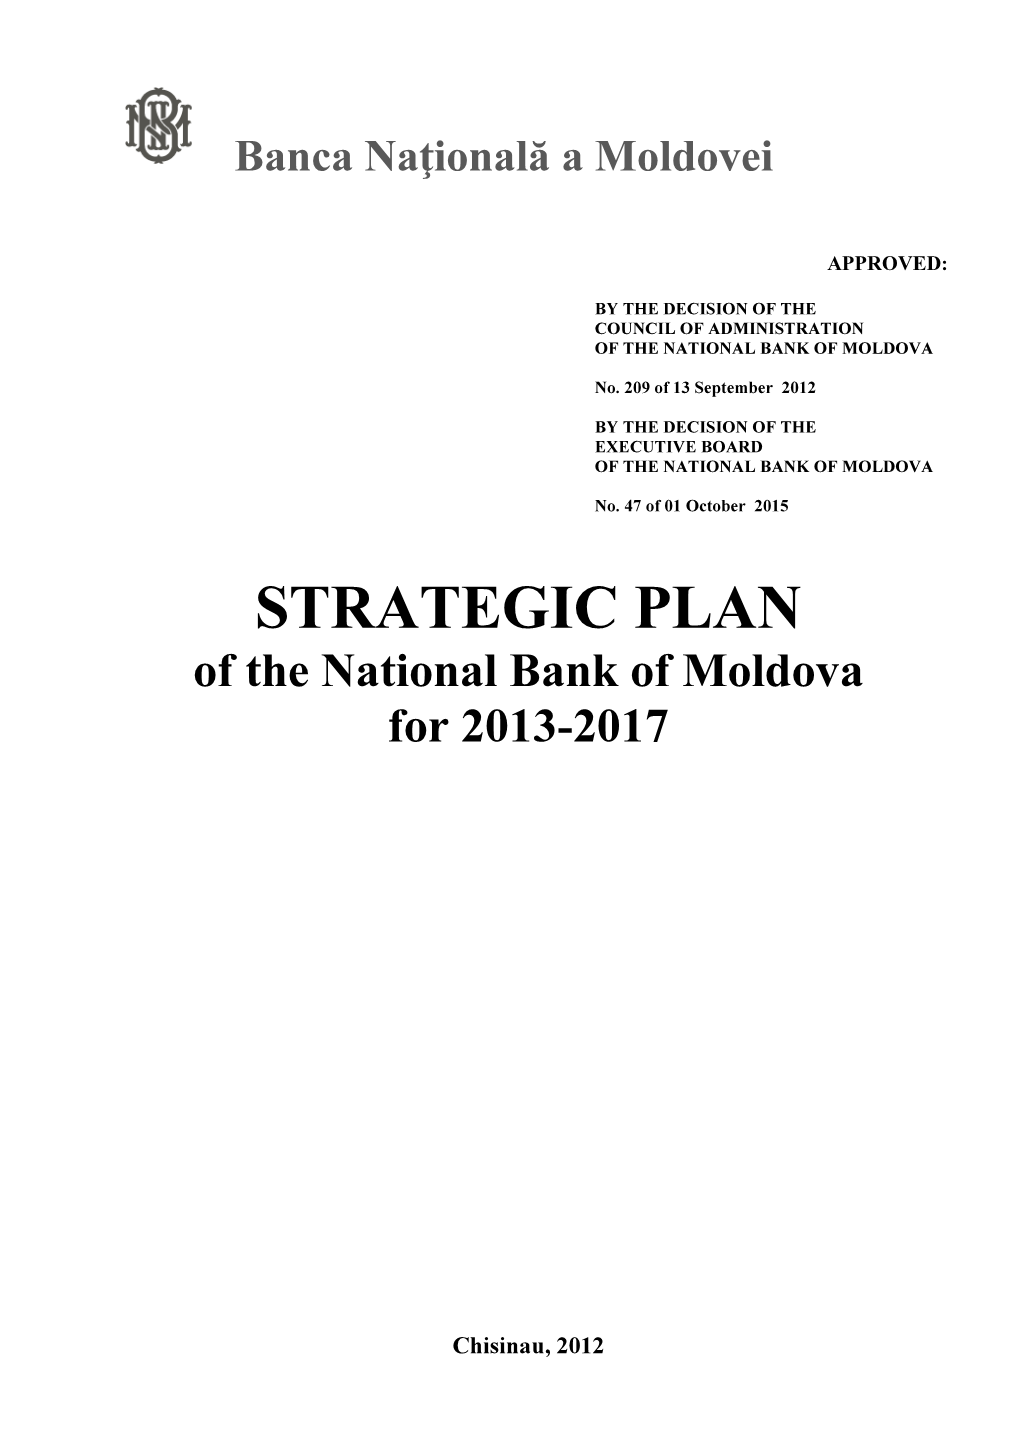 The Strategic Plan of the National Bank of Moldova for 2013